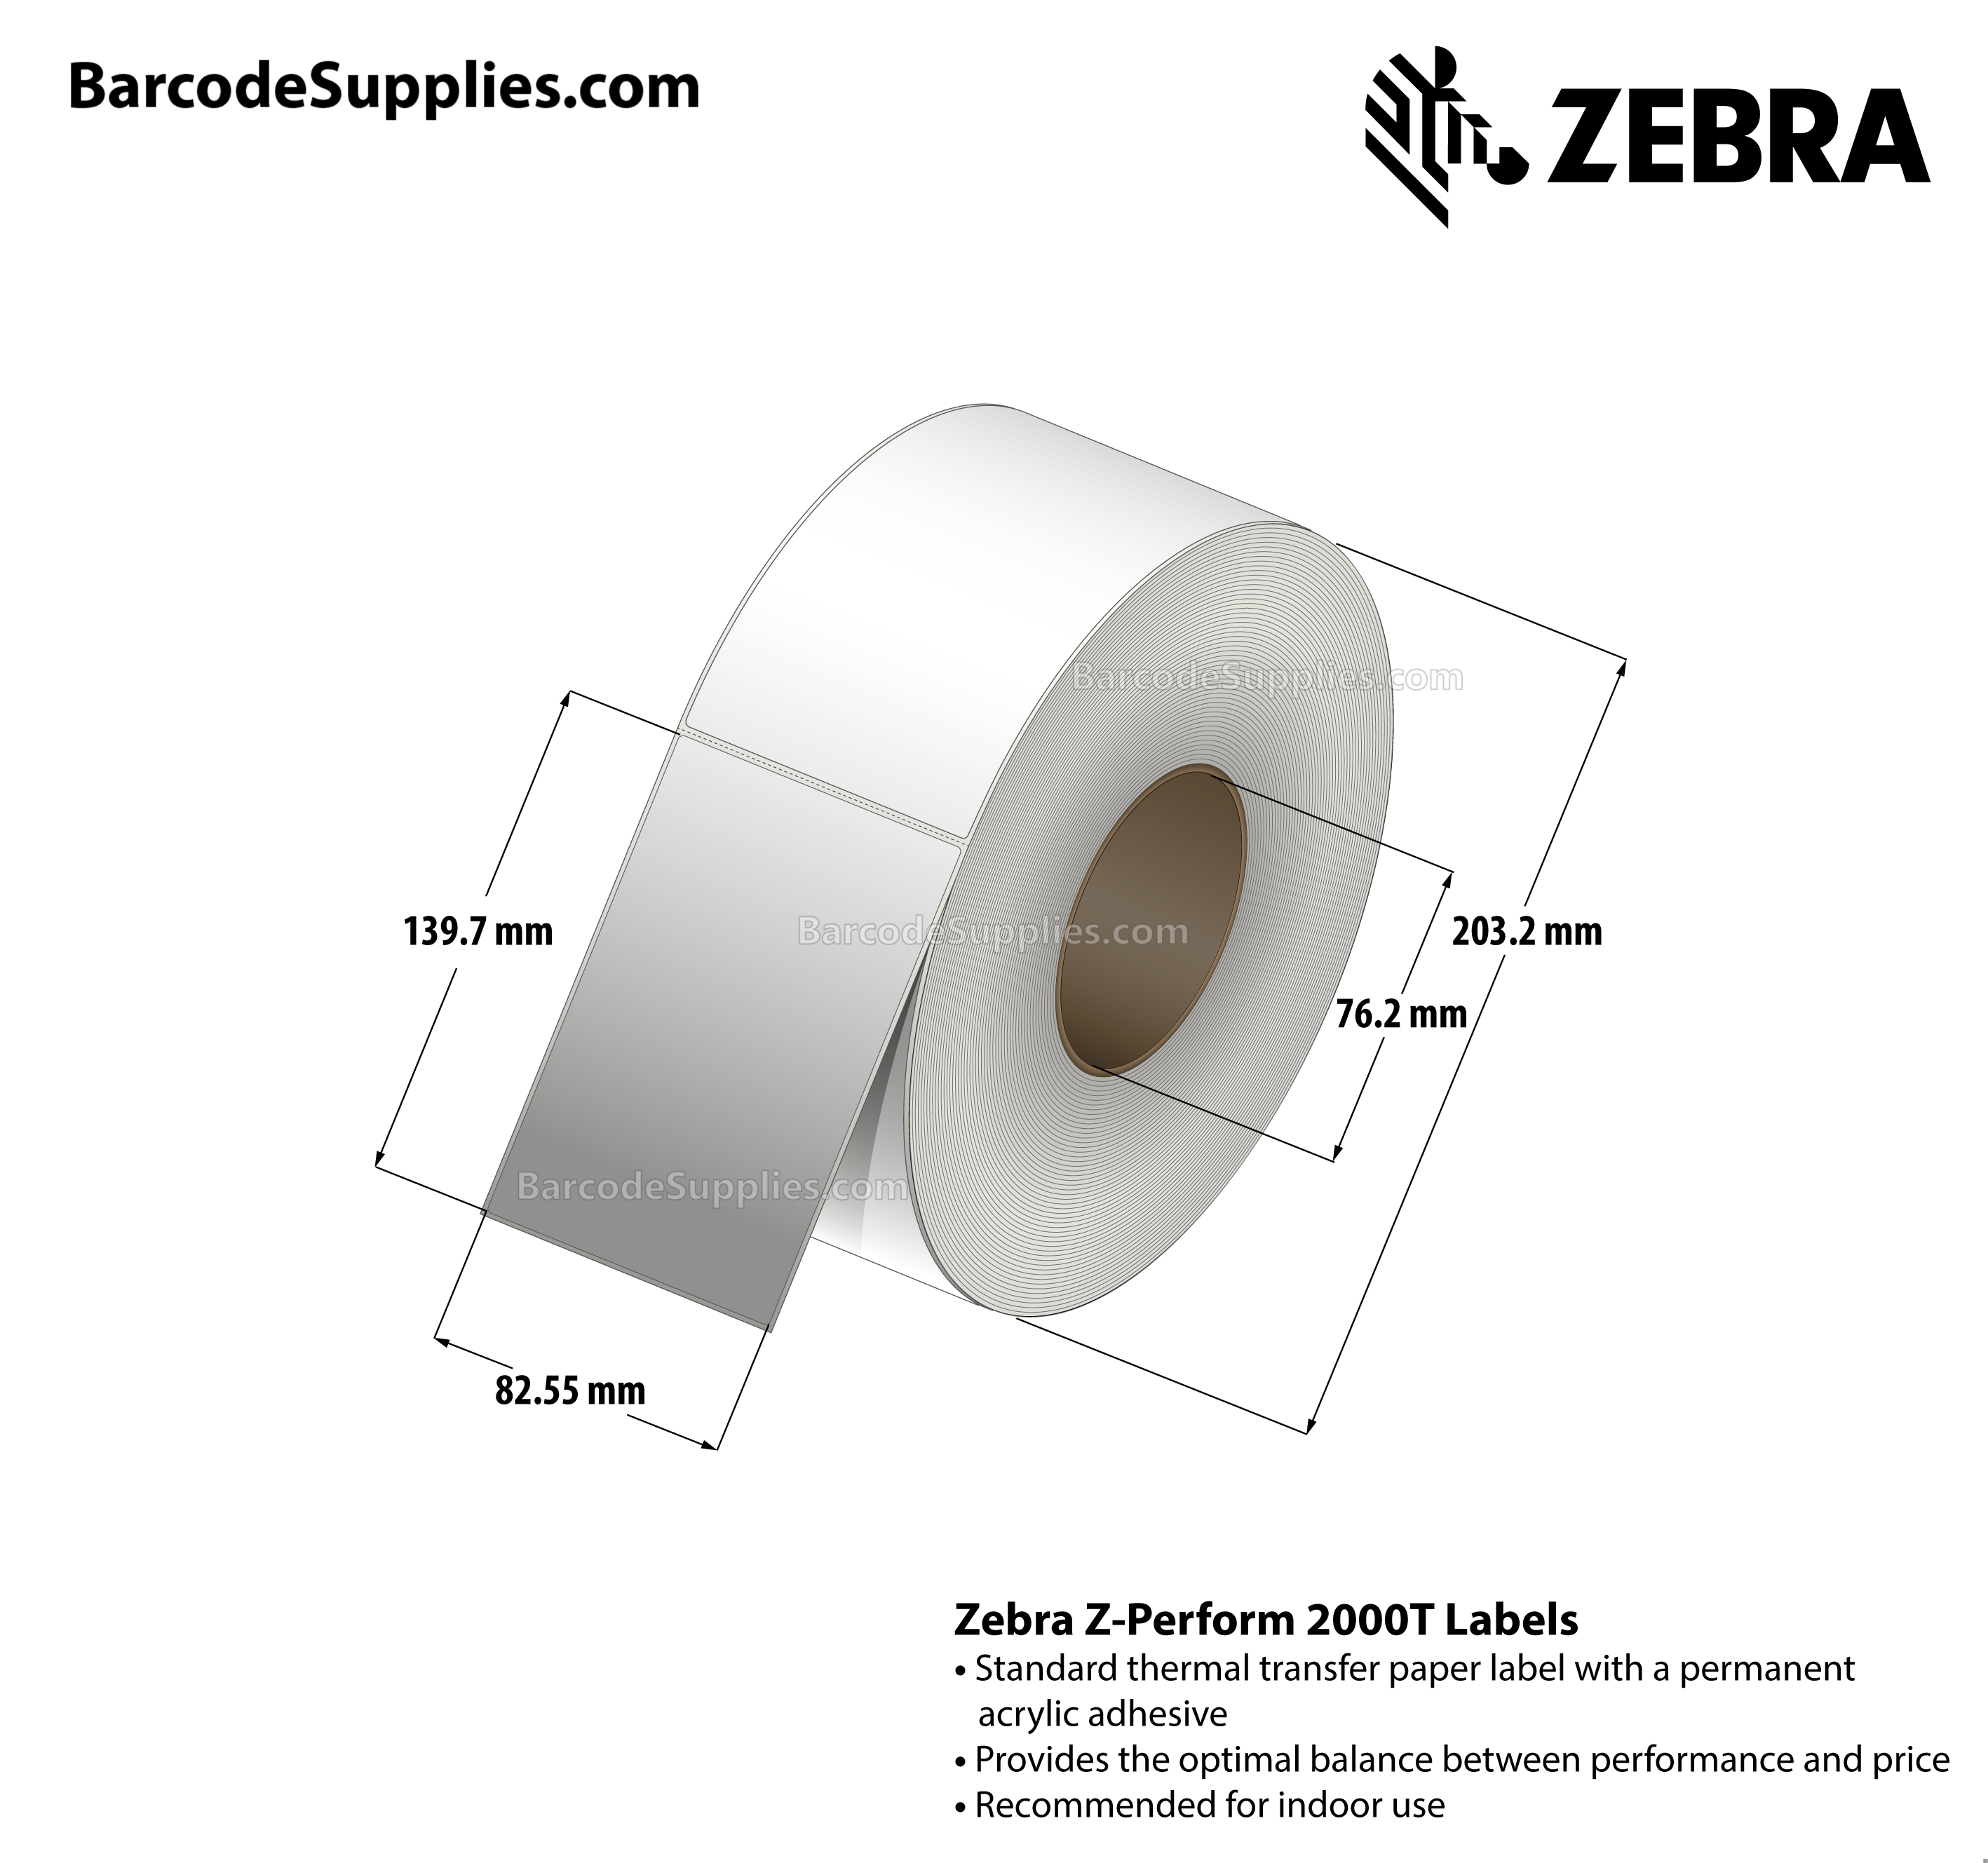 3.25 x 5.5 Thermal Transfer White Z-Perform 2000T All-Temp Labels With All-Temp Adhesive - Not Perforated - 1040 Labels Per Roll - Carton Of 6 Rolls - 6240 Labels Total - MPN: 72371